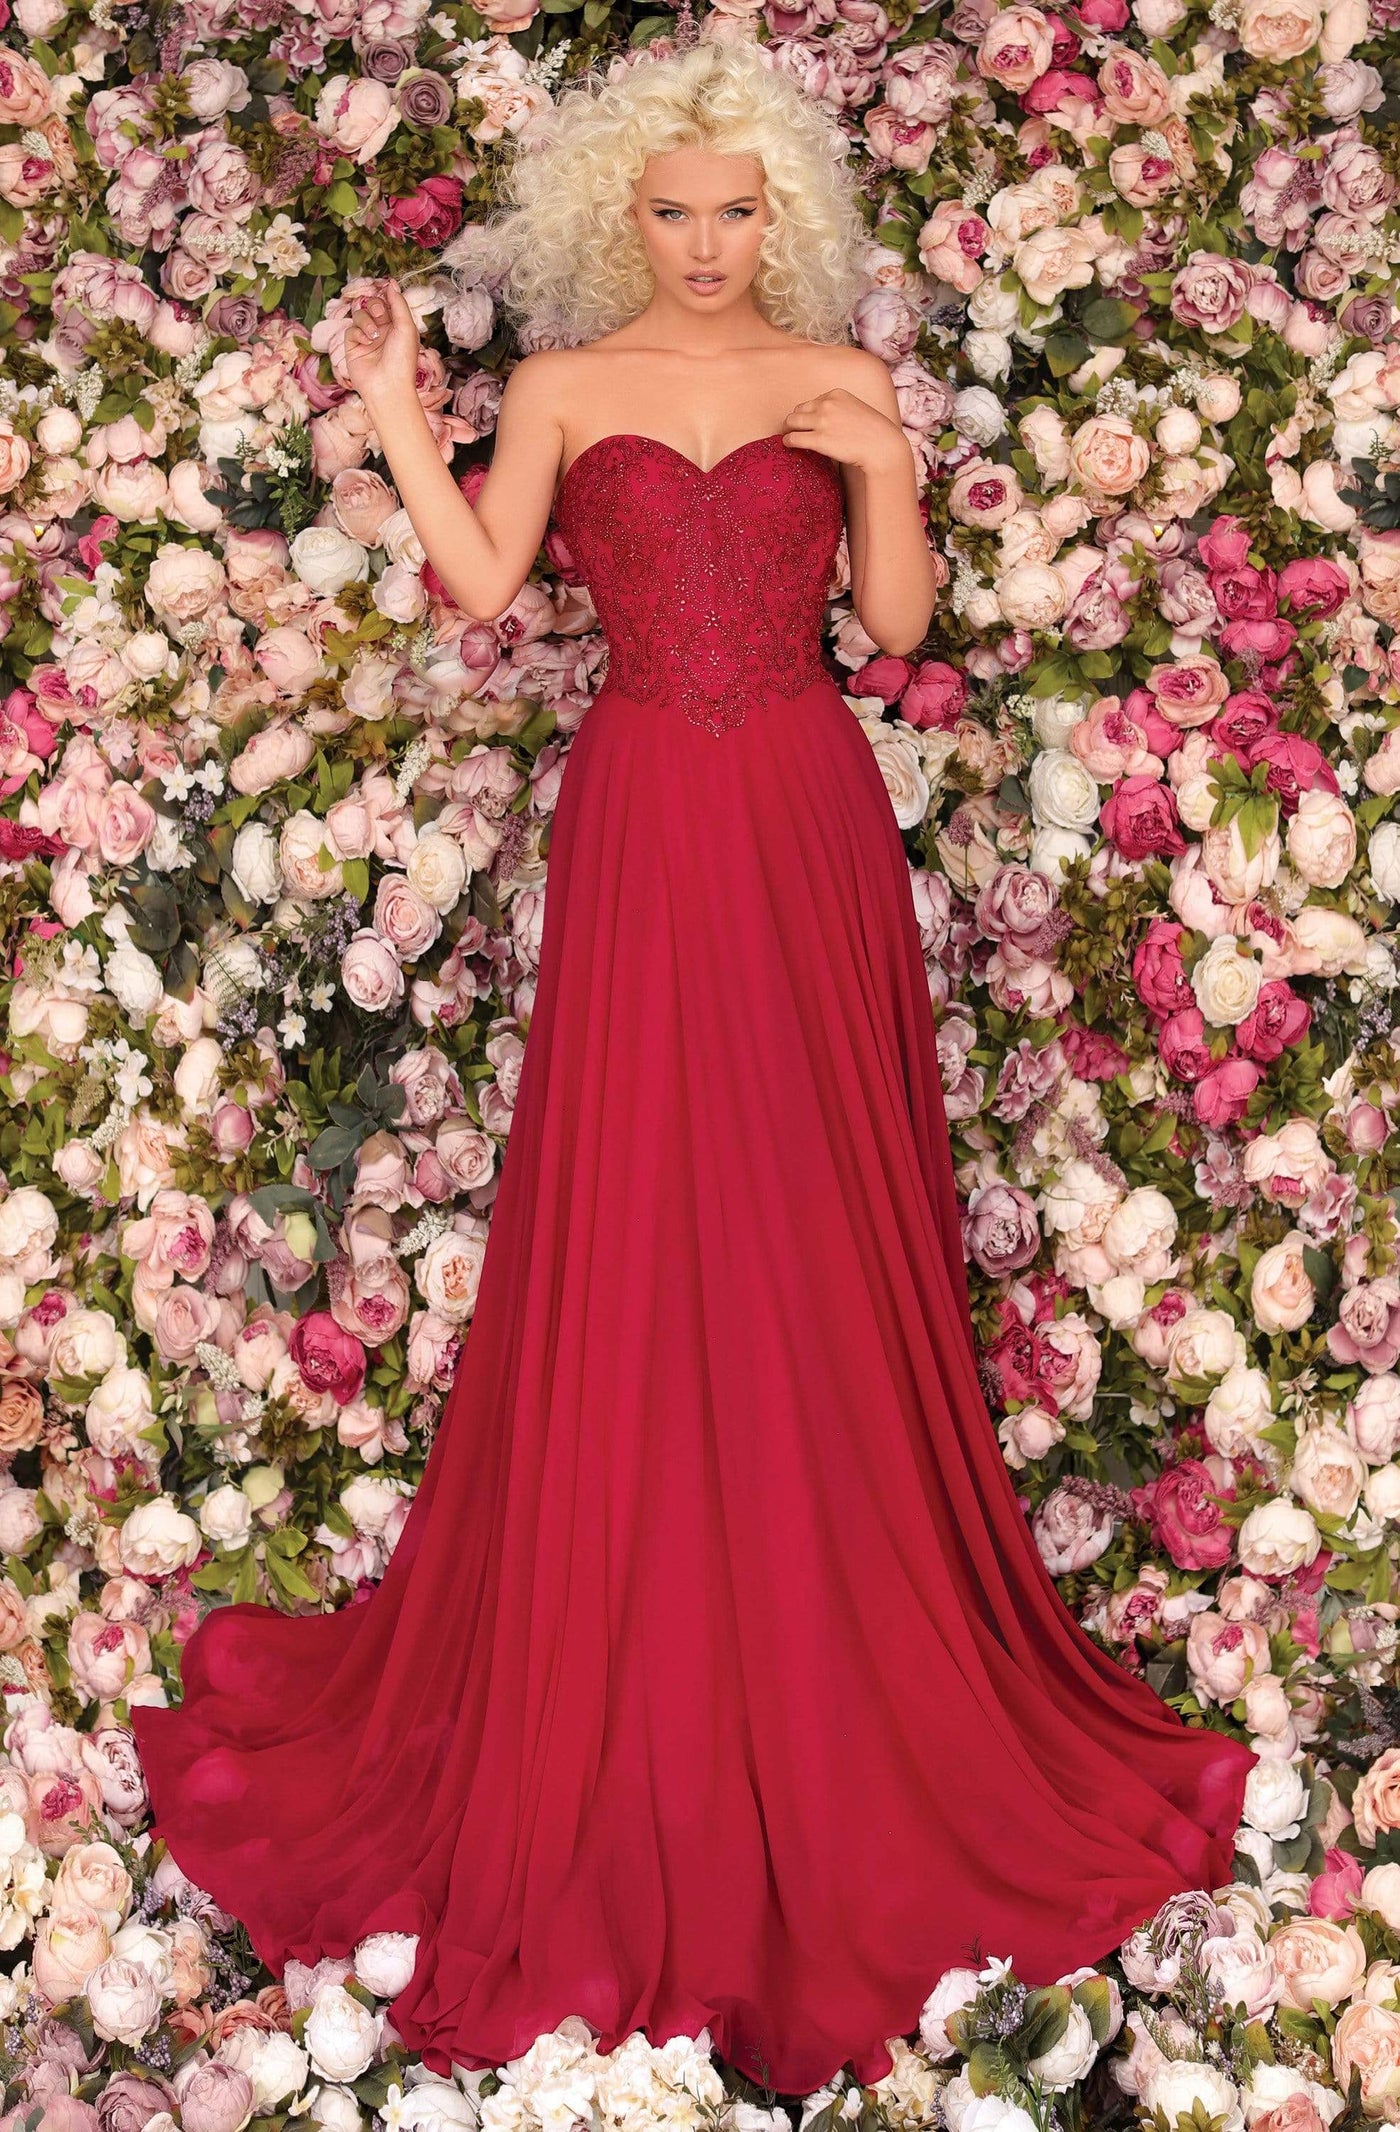 Clarisse - 8023 Beaded Strapless Sweetheart Neck A-Line Gown Prom Dresses 0 / Vamp Red